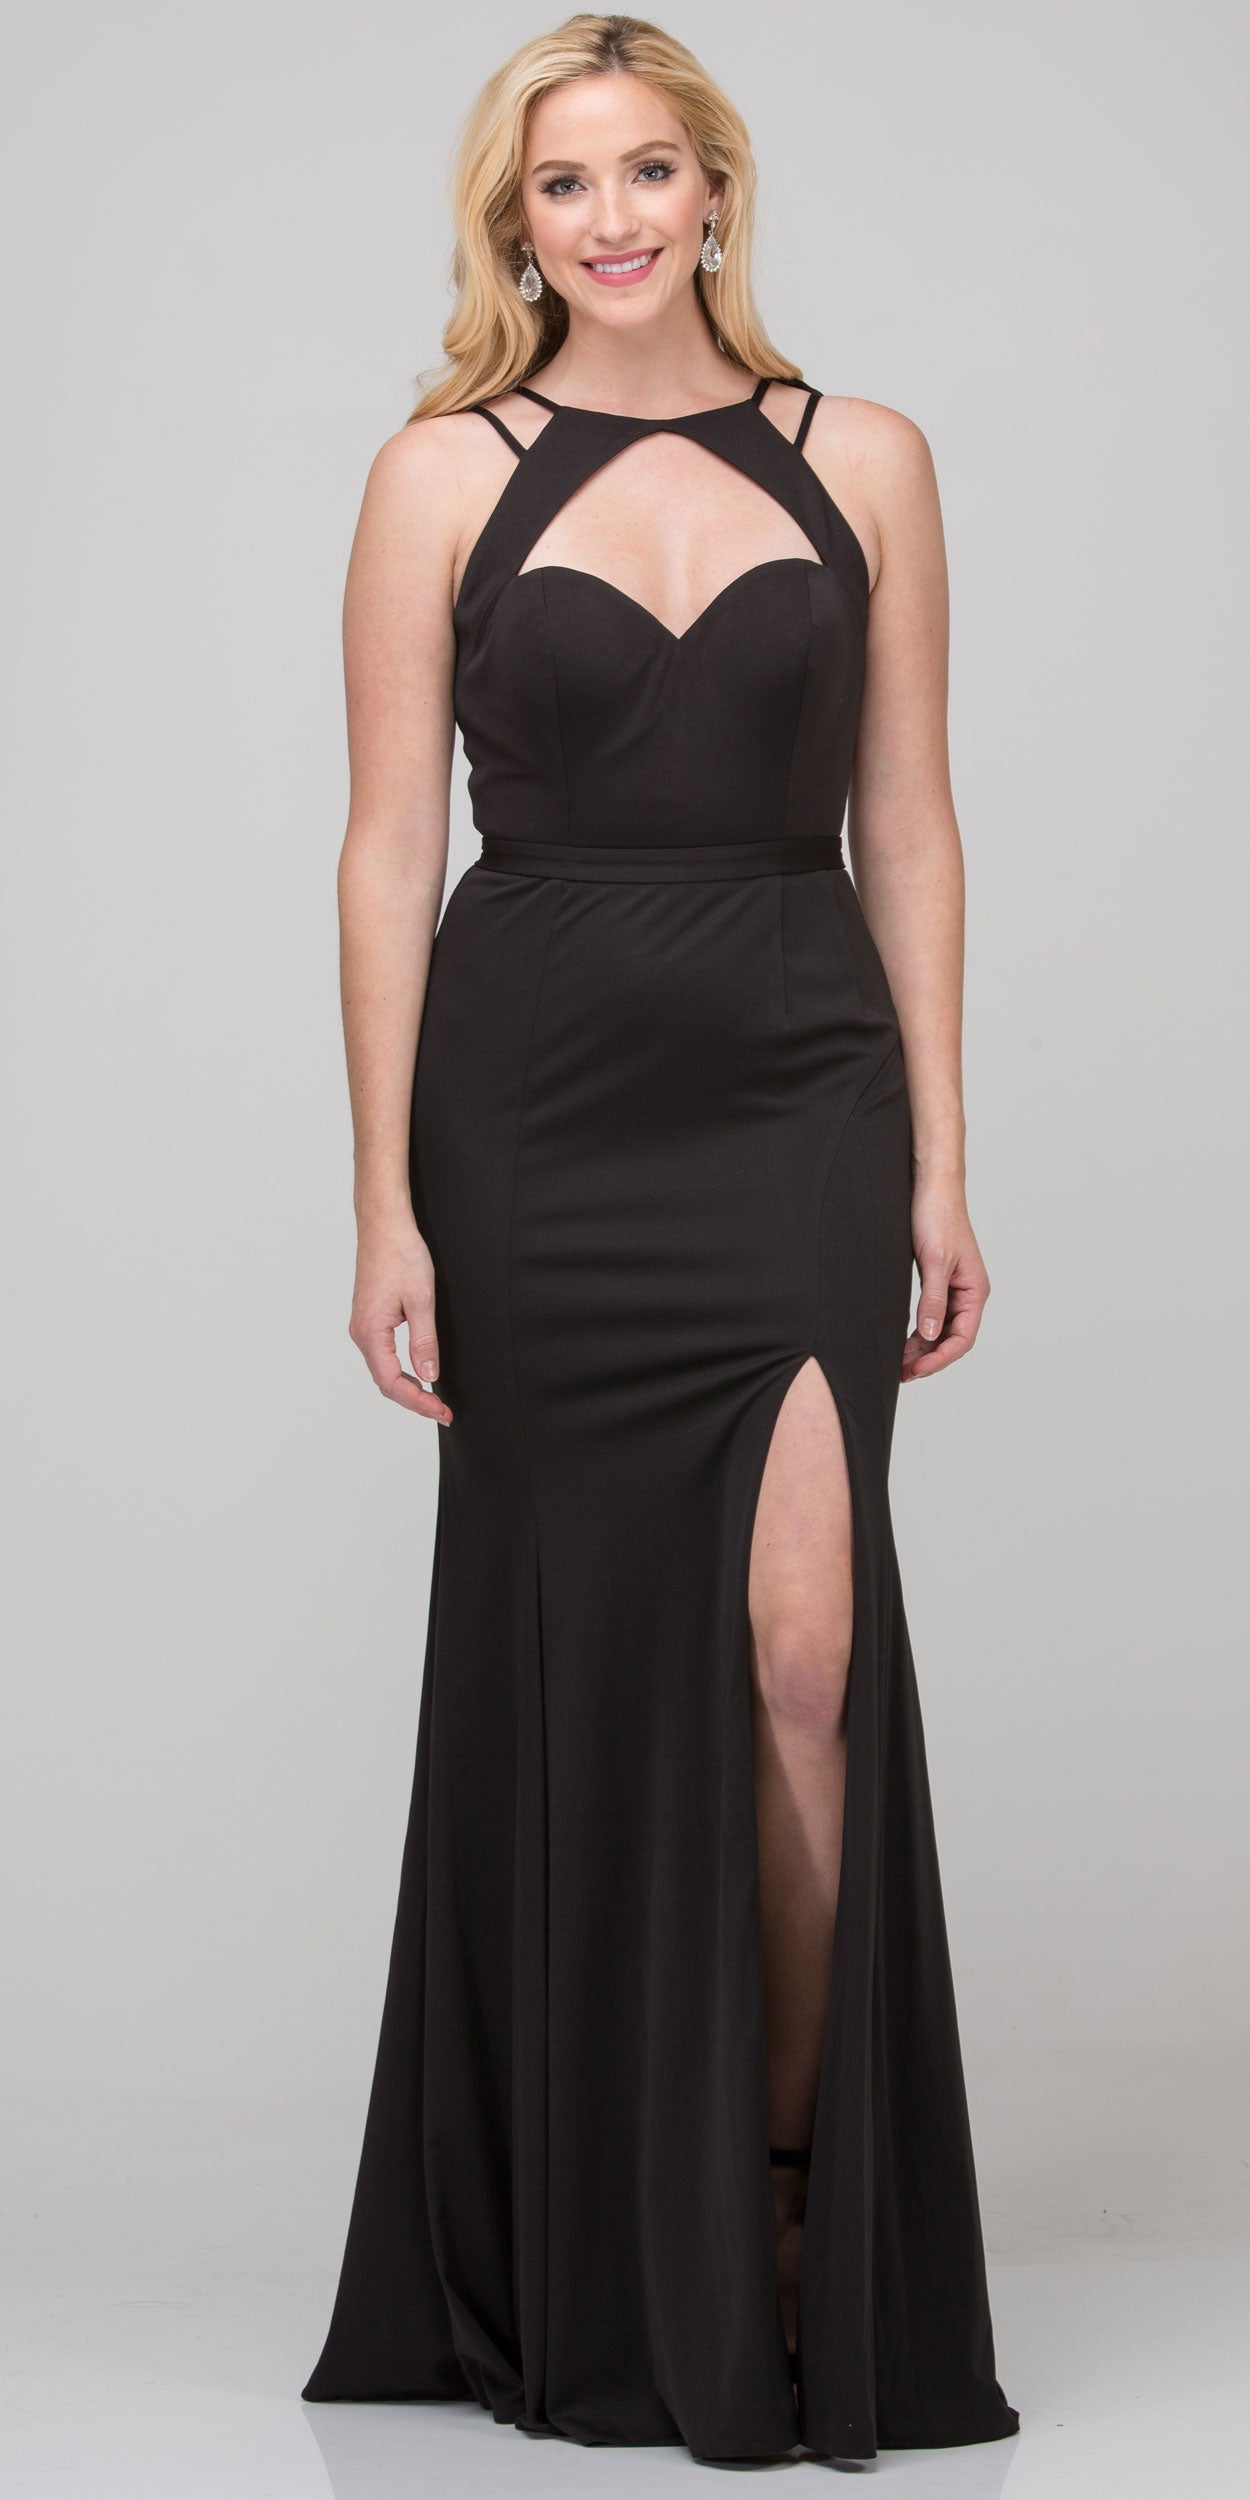 Image of Cutout Sweetheart Neckline Long Fitted Formal Prom Dress in Black